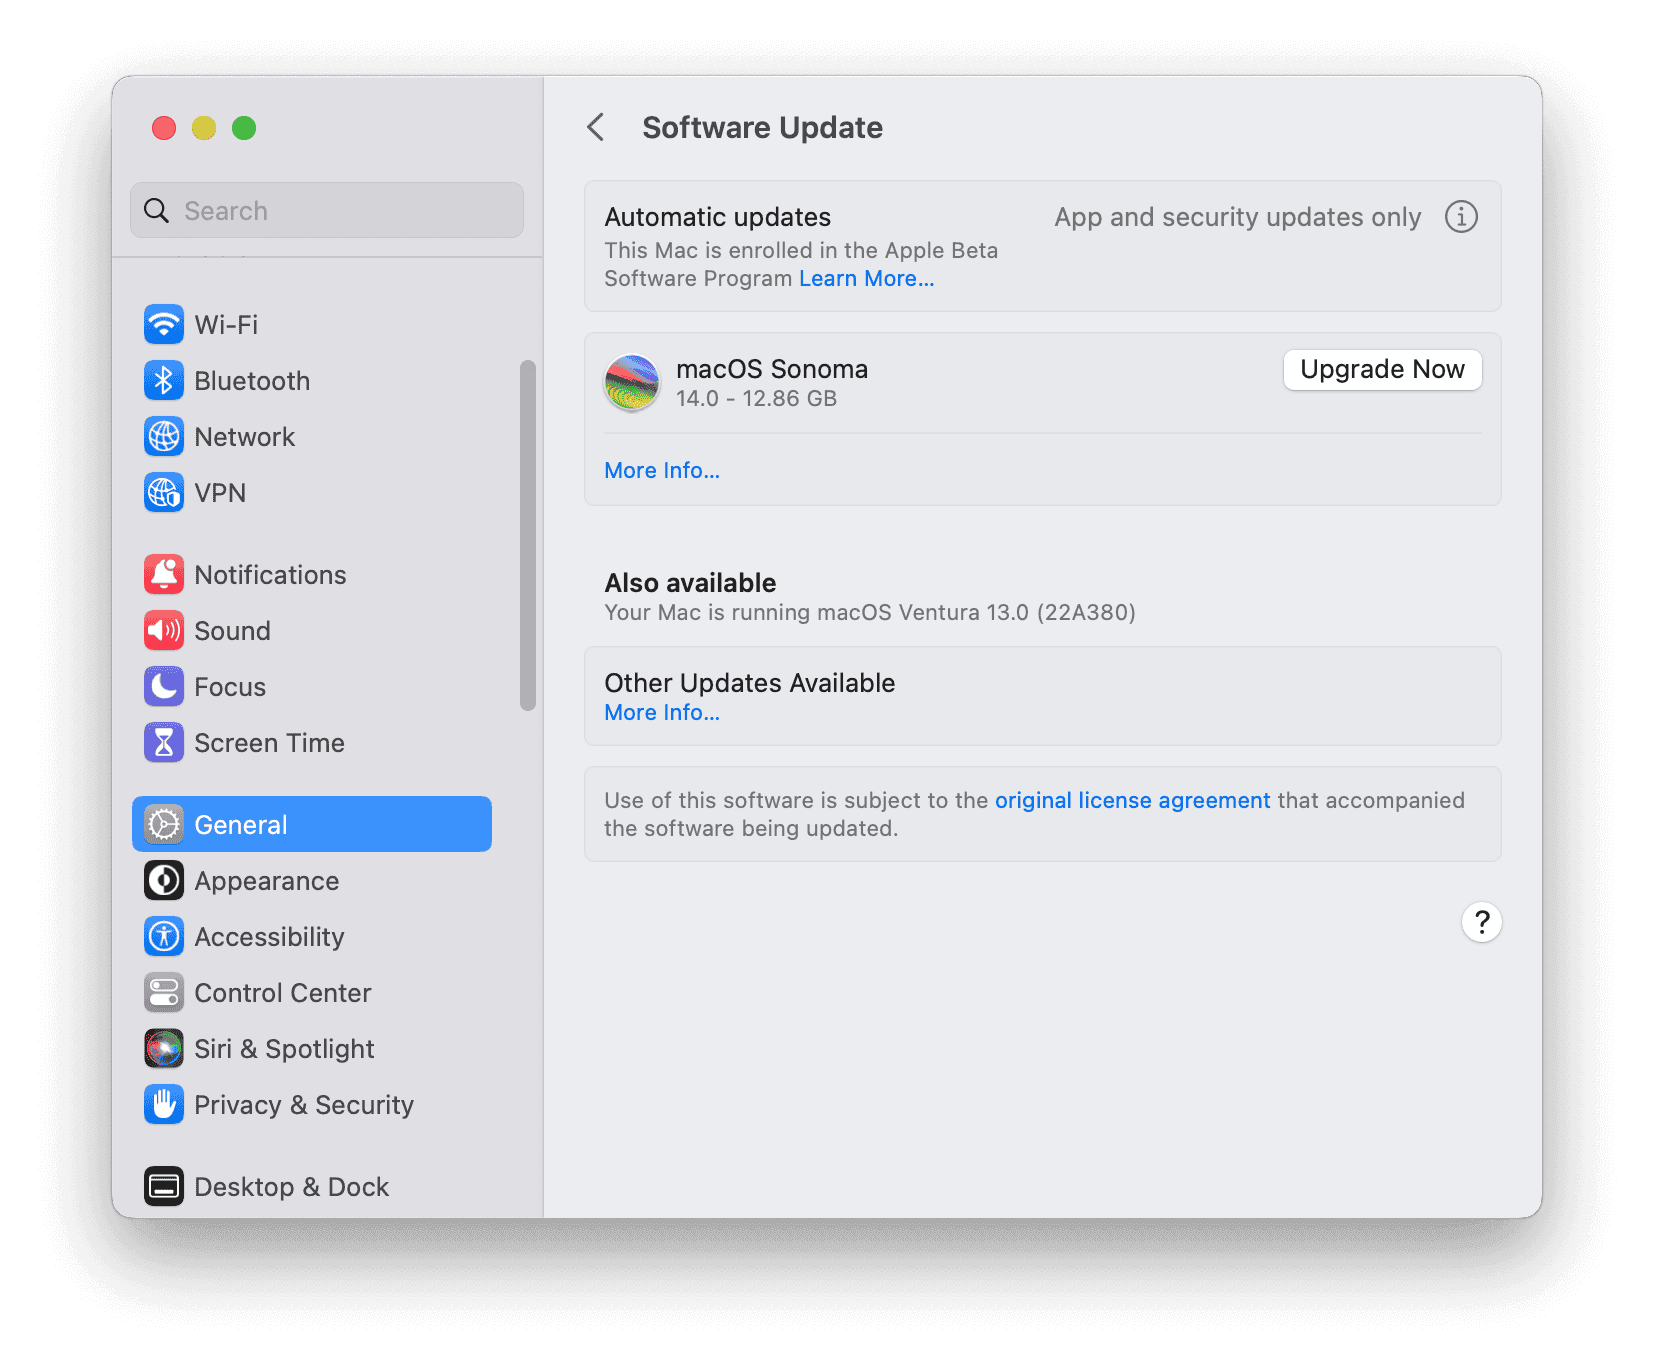 Download and Install macOS Sonoma